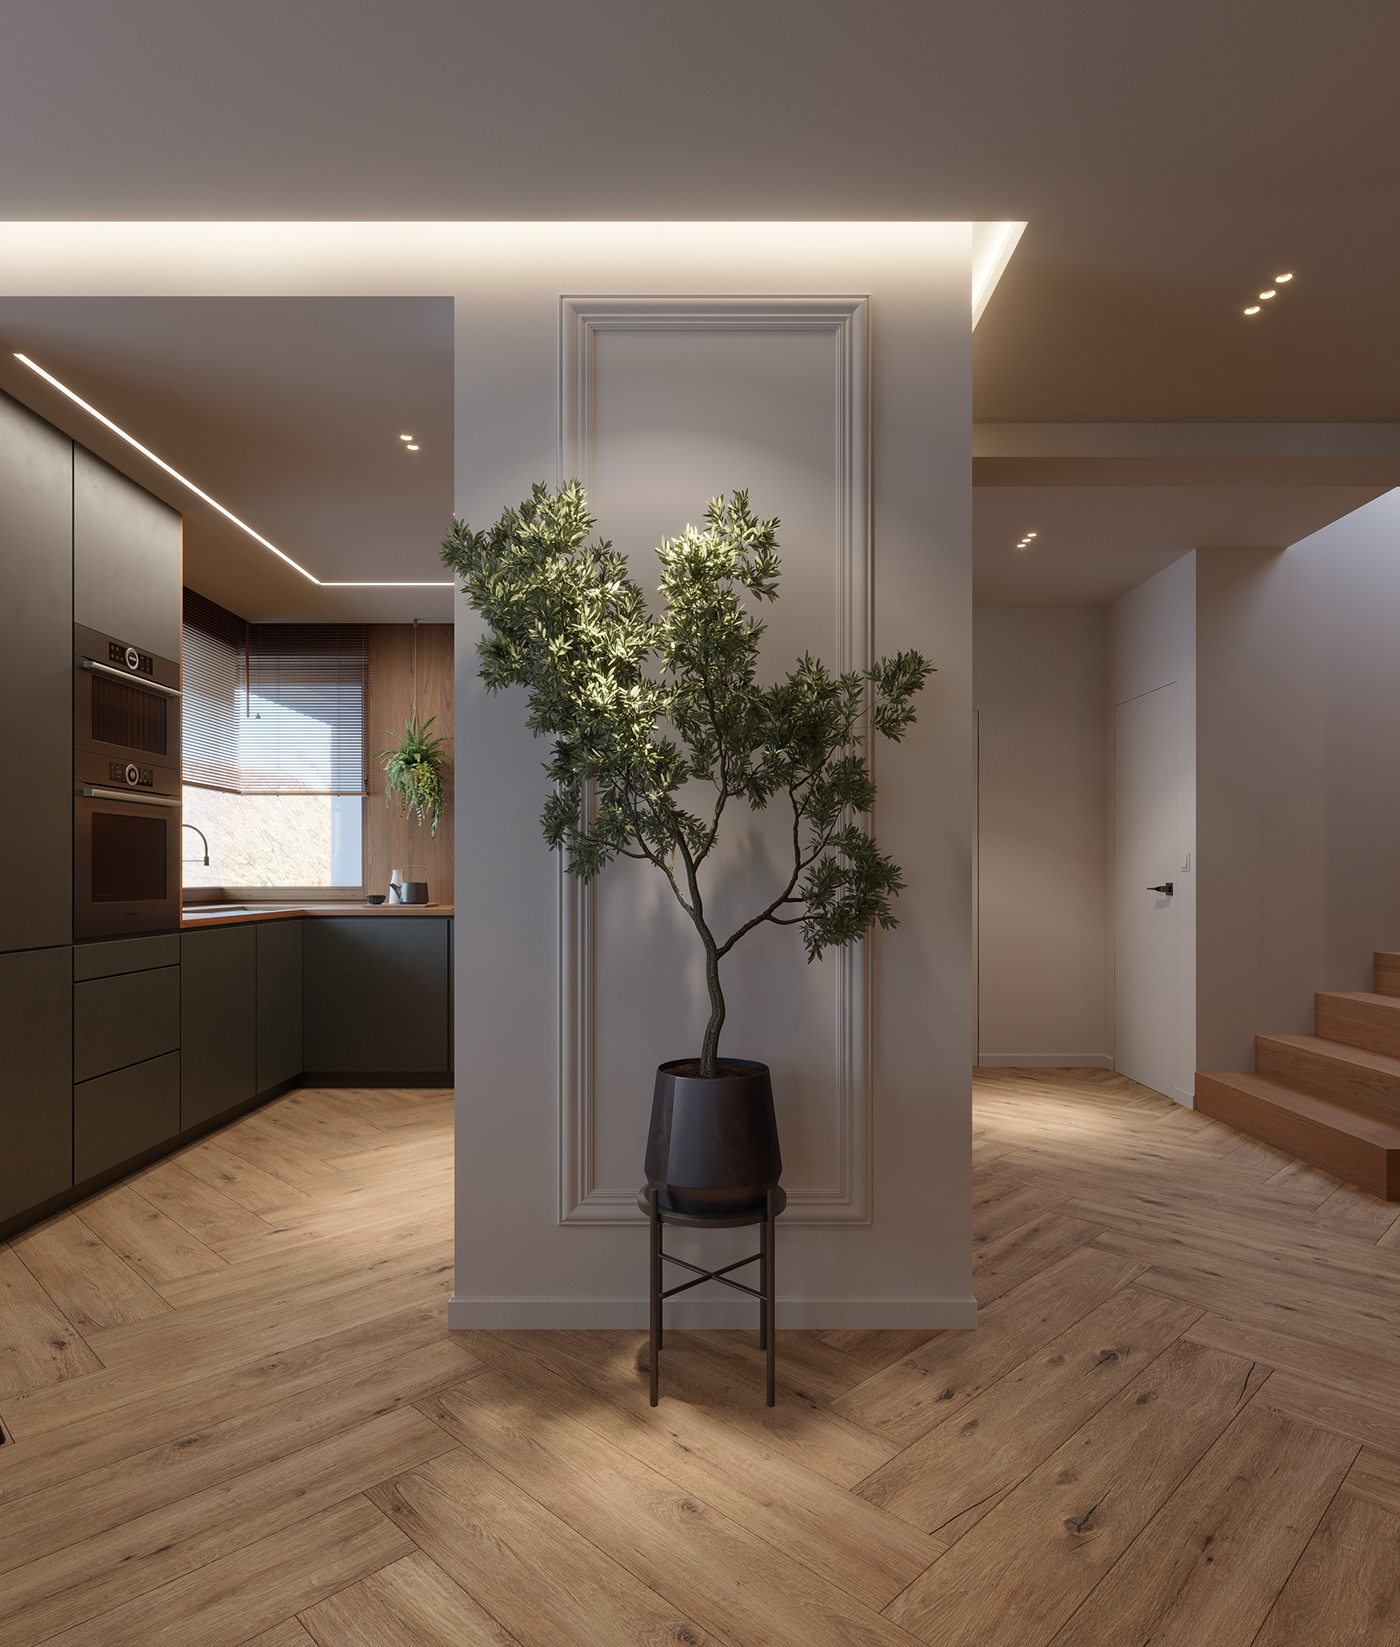 3D Visualization 3ds max corona render  green interiors interior design  Interior Visualization light interior modern interior design wooden interiors home office